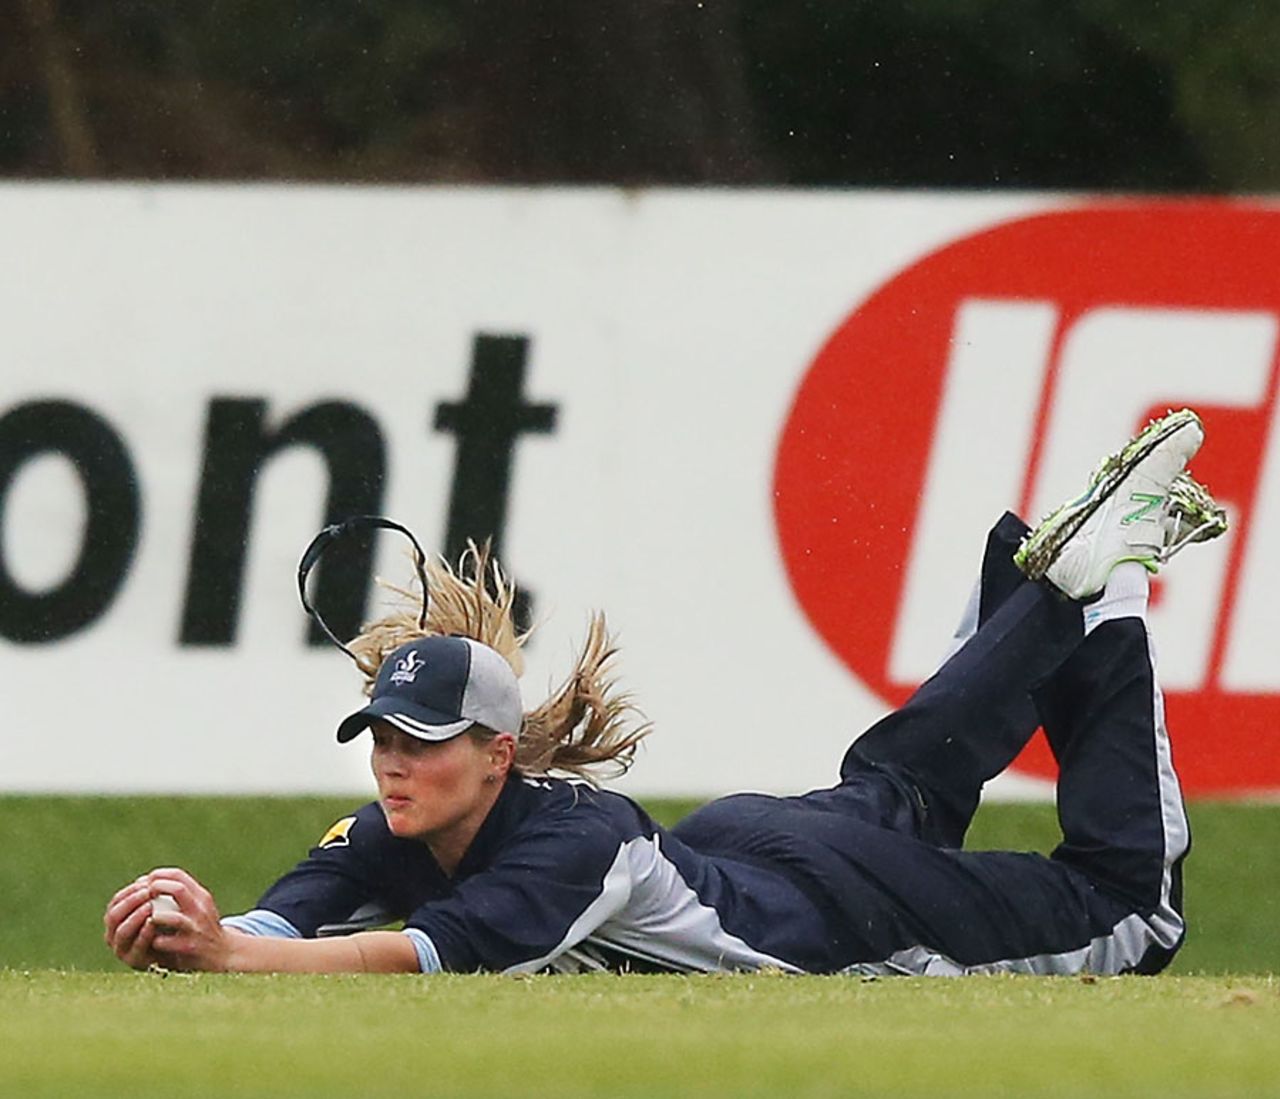 Meg Lanning dives full length to take a catch, Victoria v ACT, Russell Lucas Oval, Melbourne, October 25, 2013